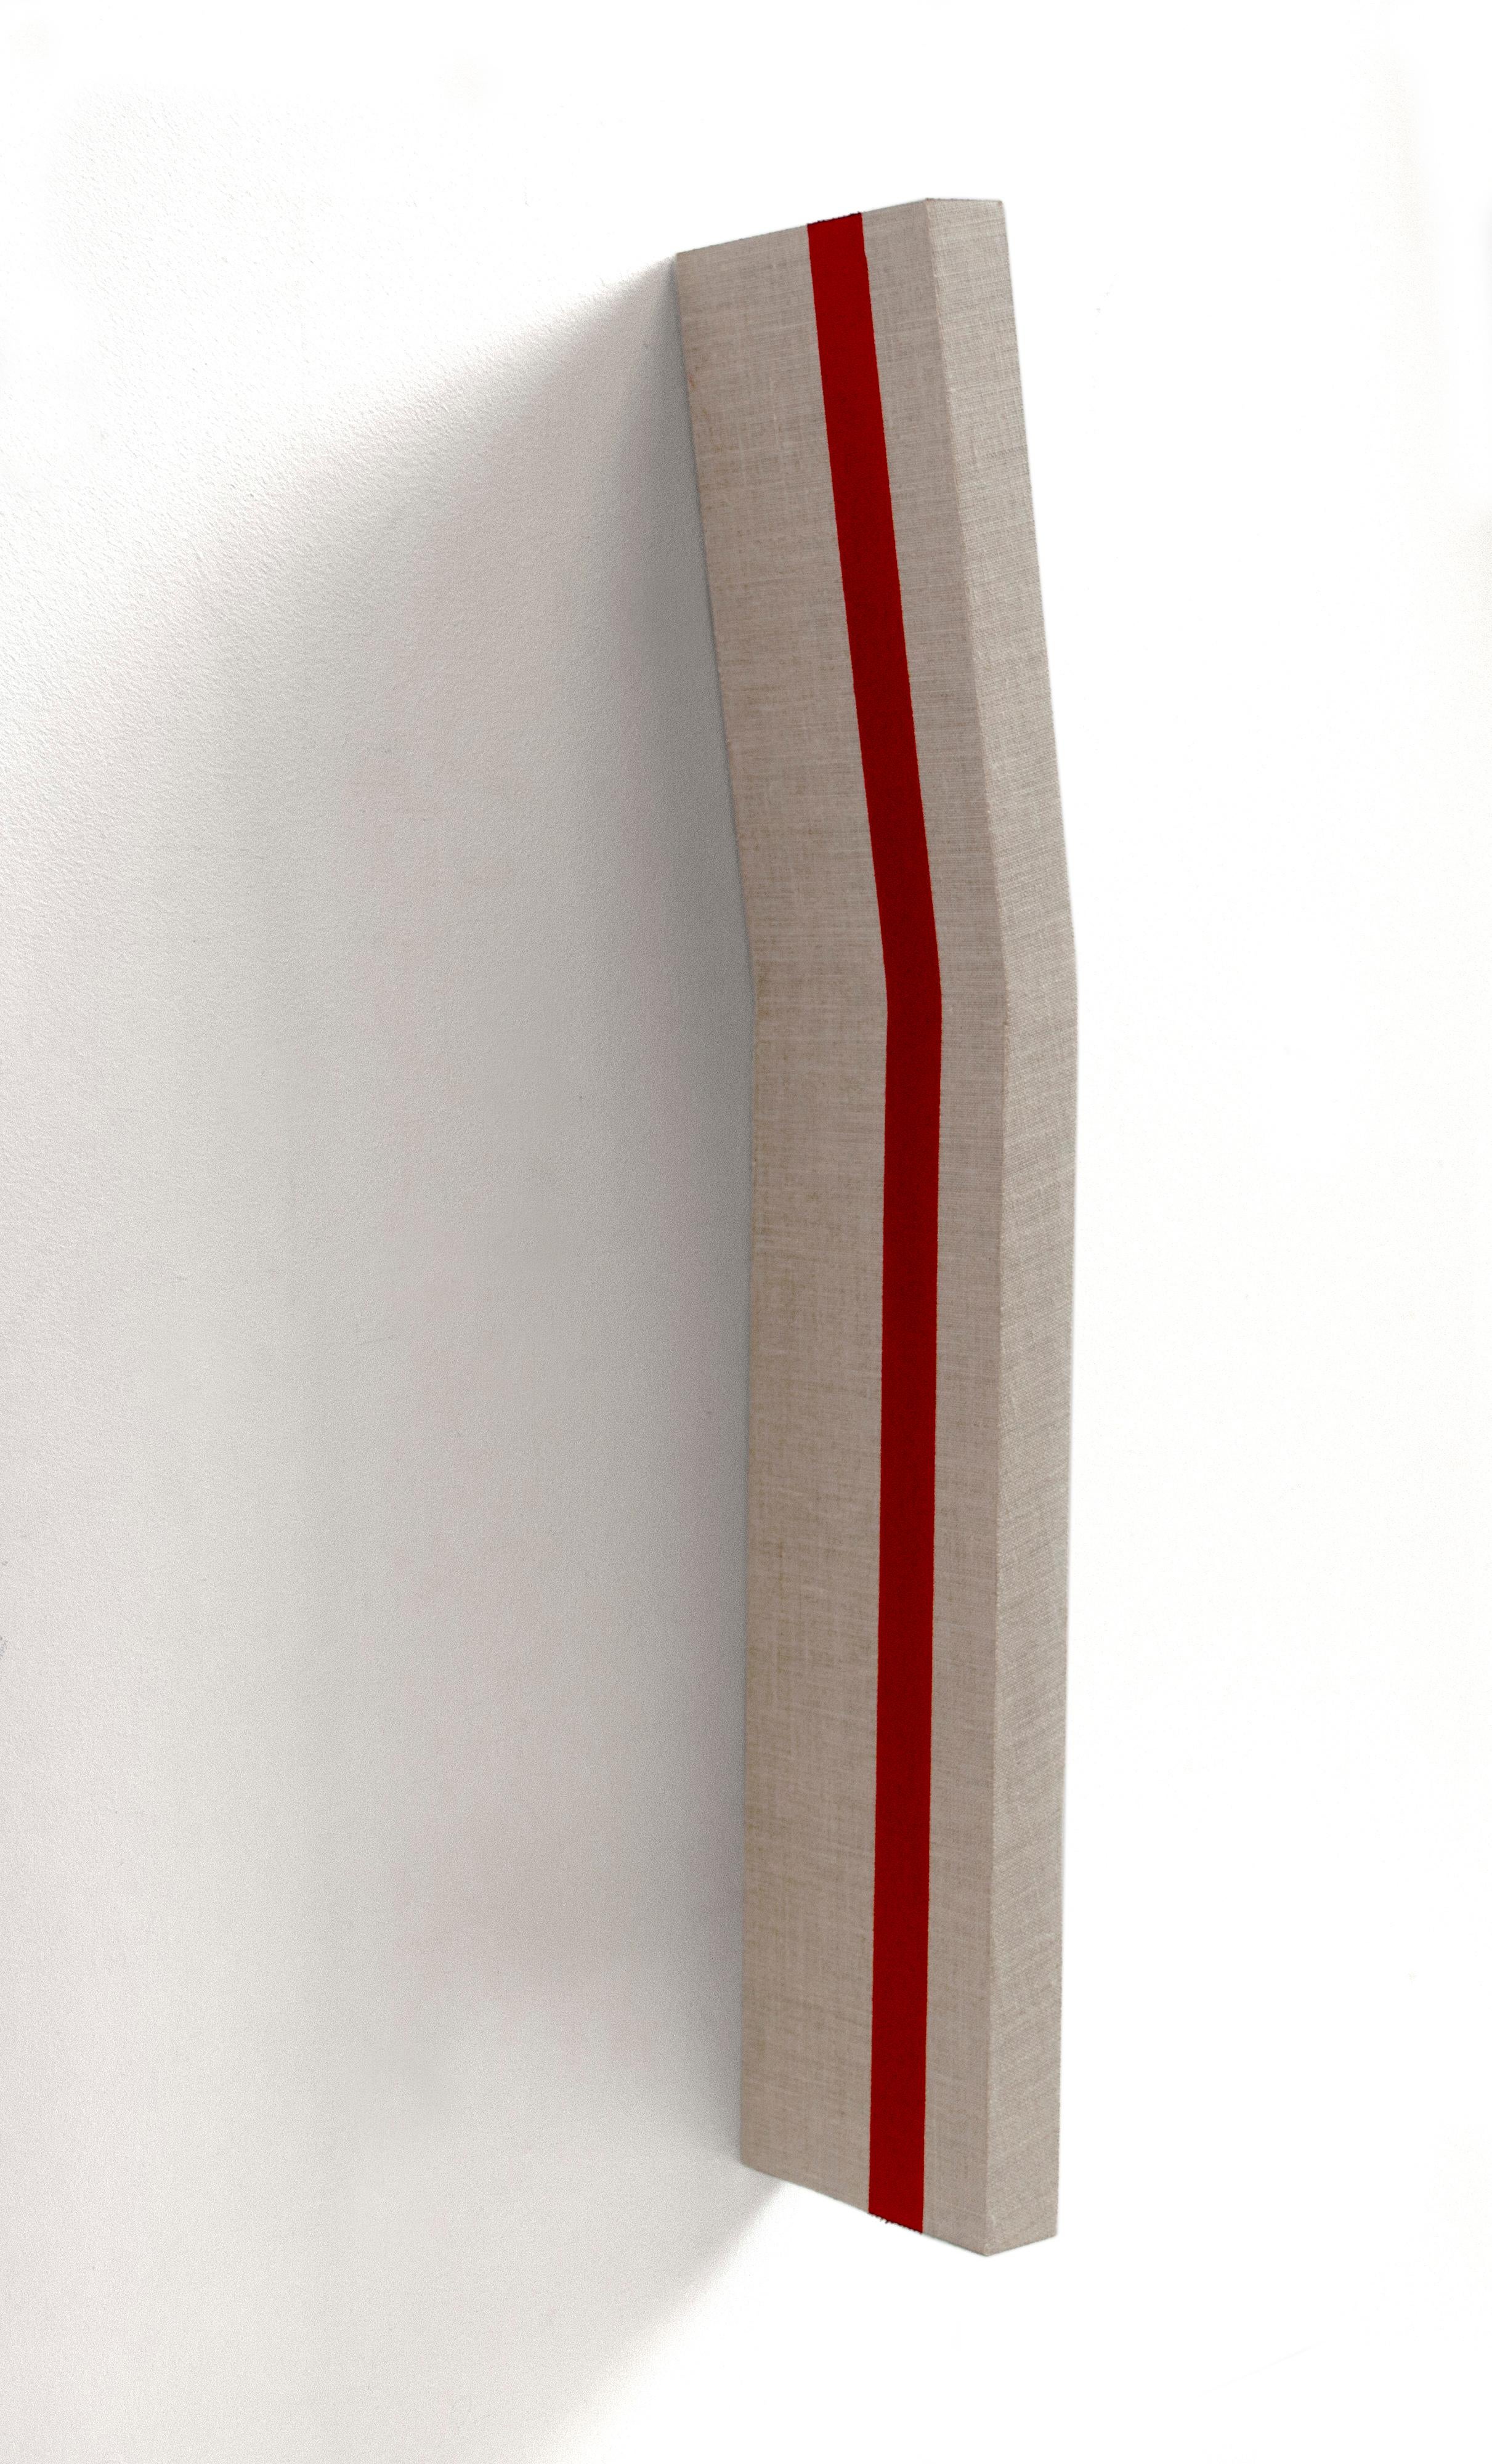 The Long Red Line (series)